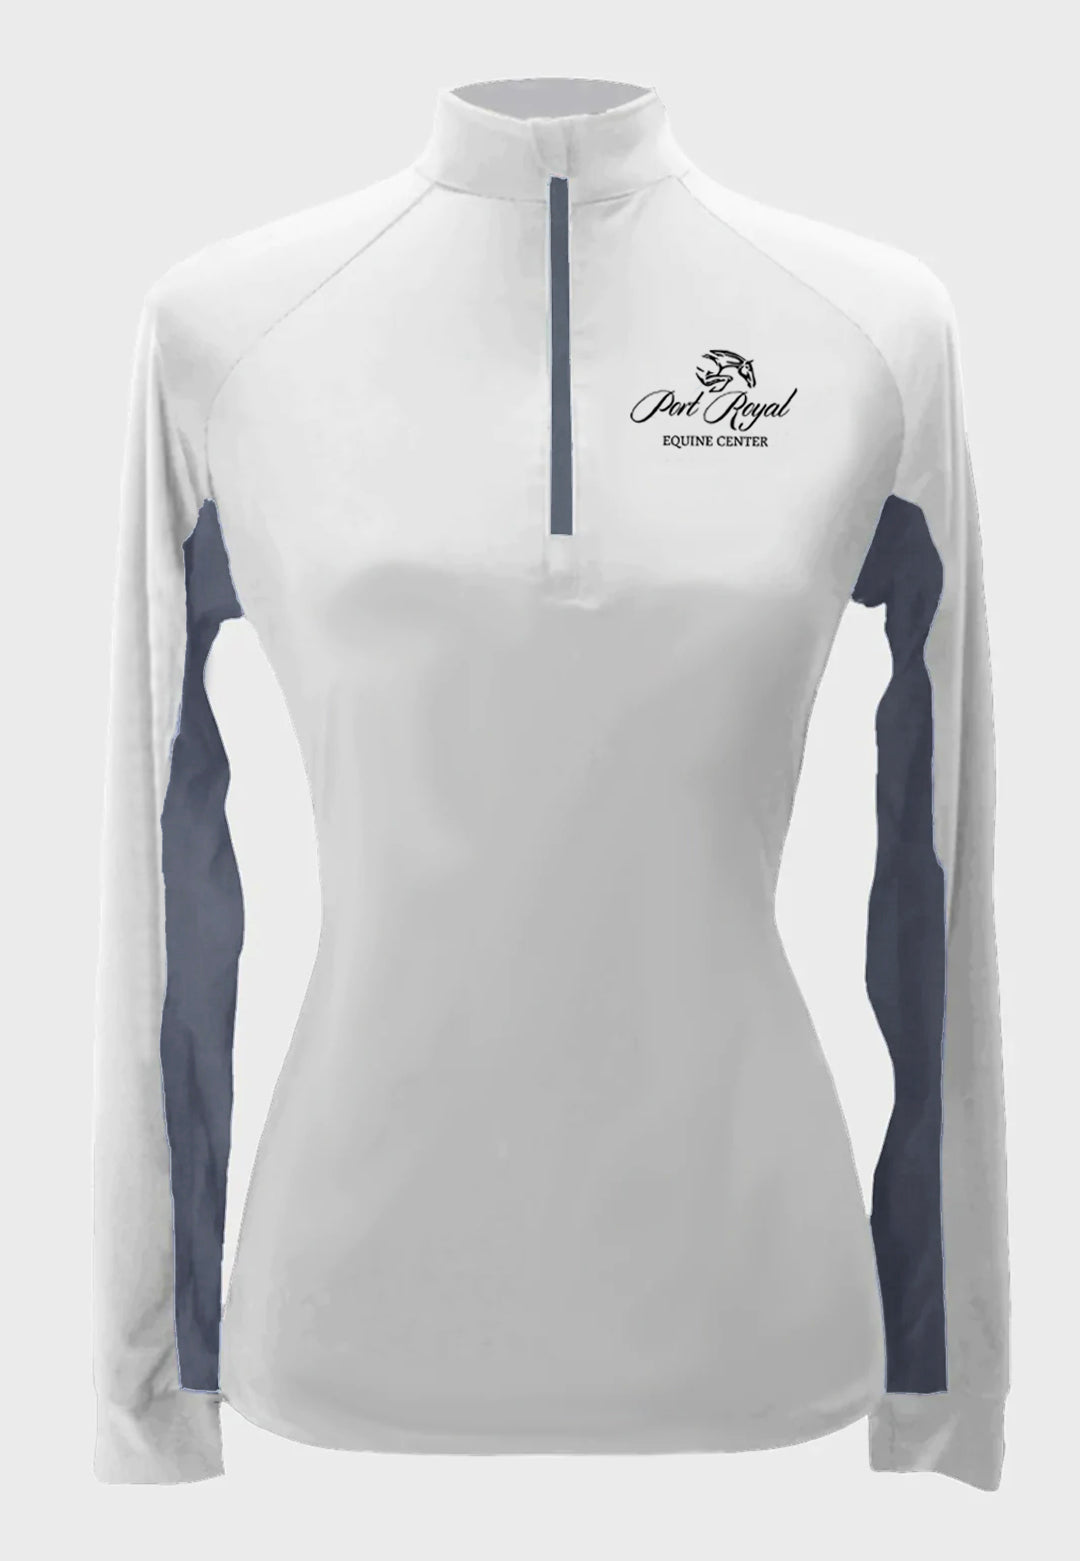 Port Royal Equine Center White Custom Sun Shirt  - Adult and Youth Sizes